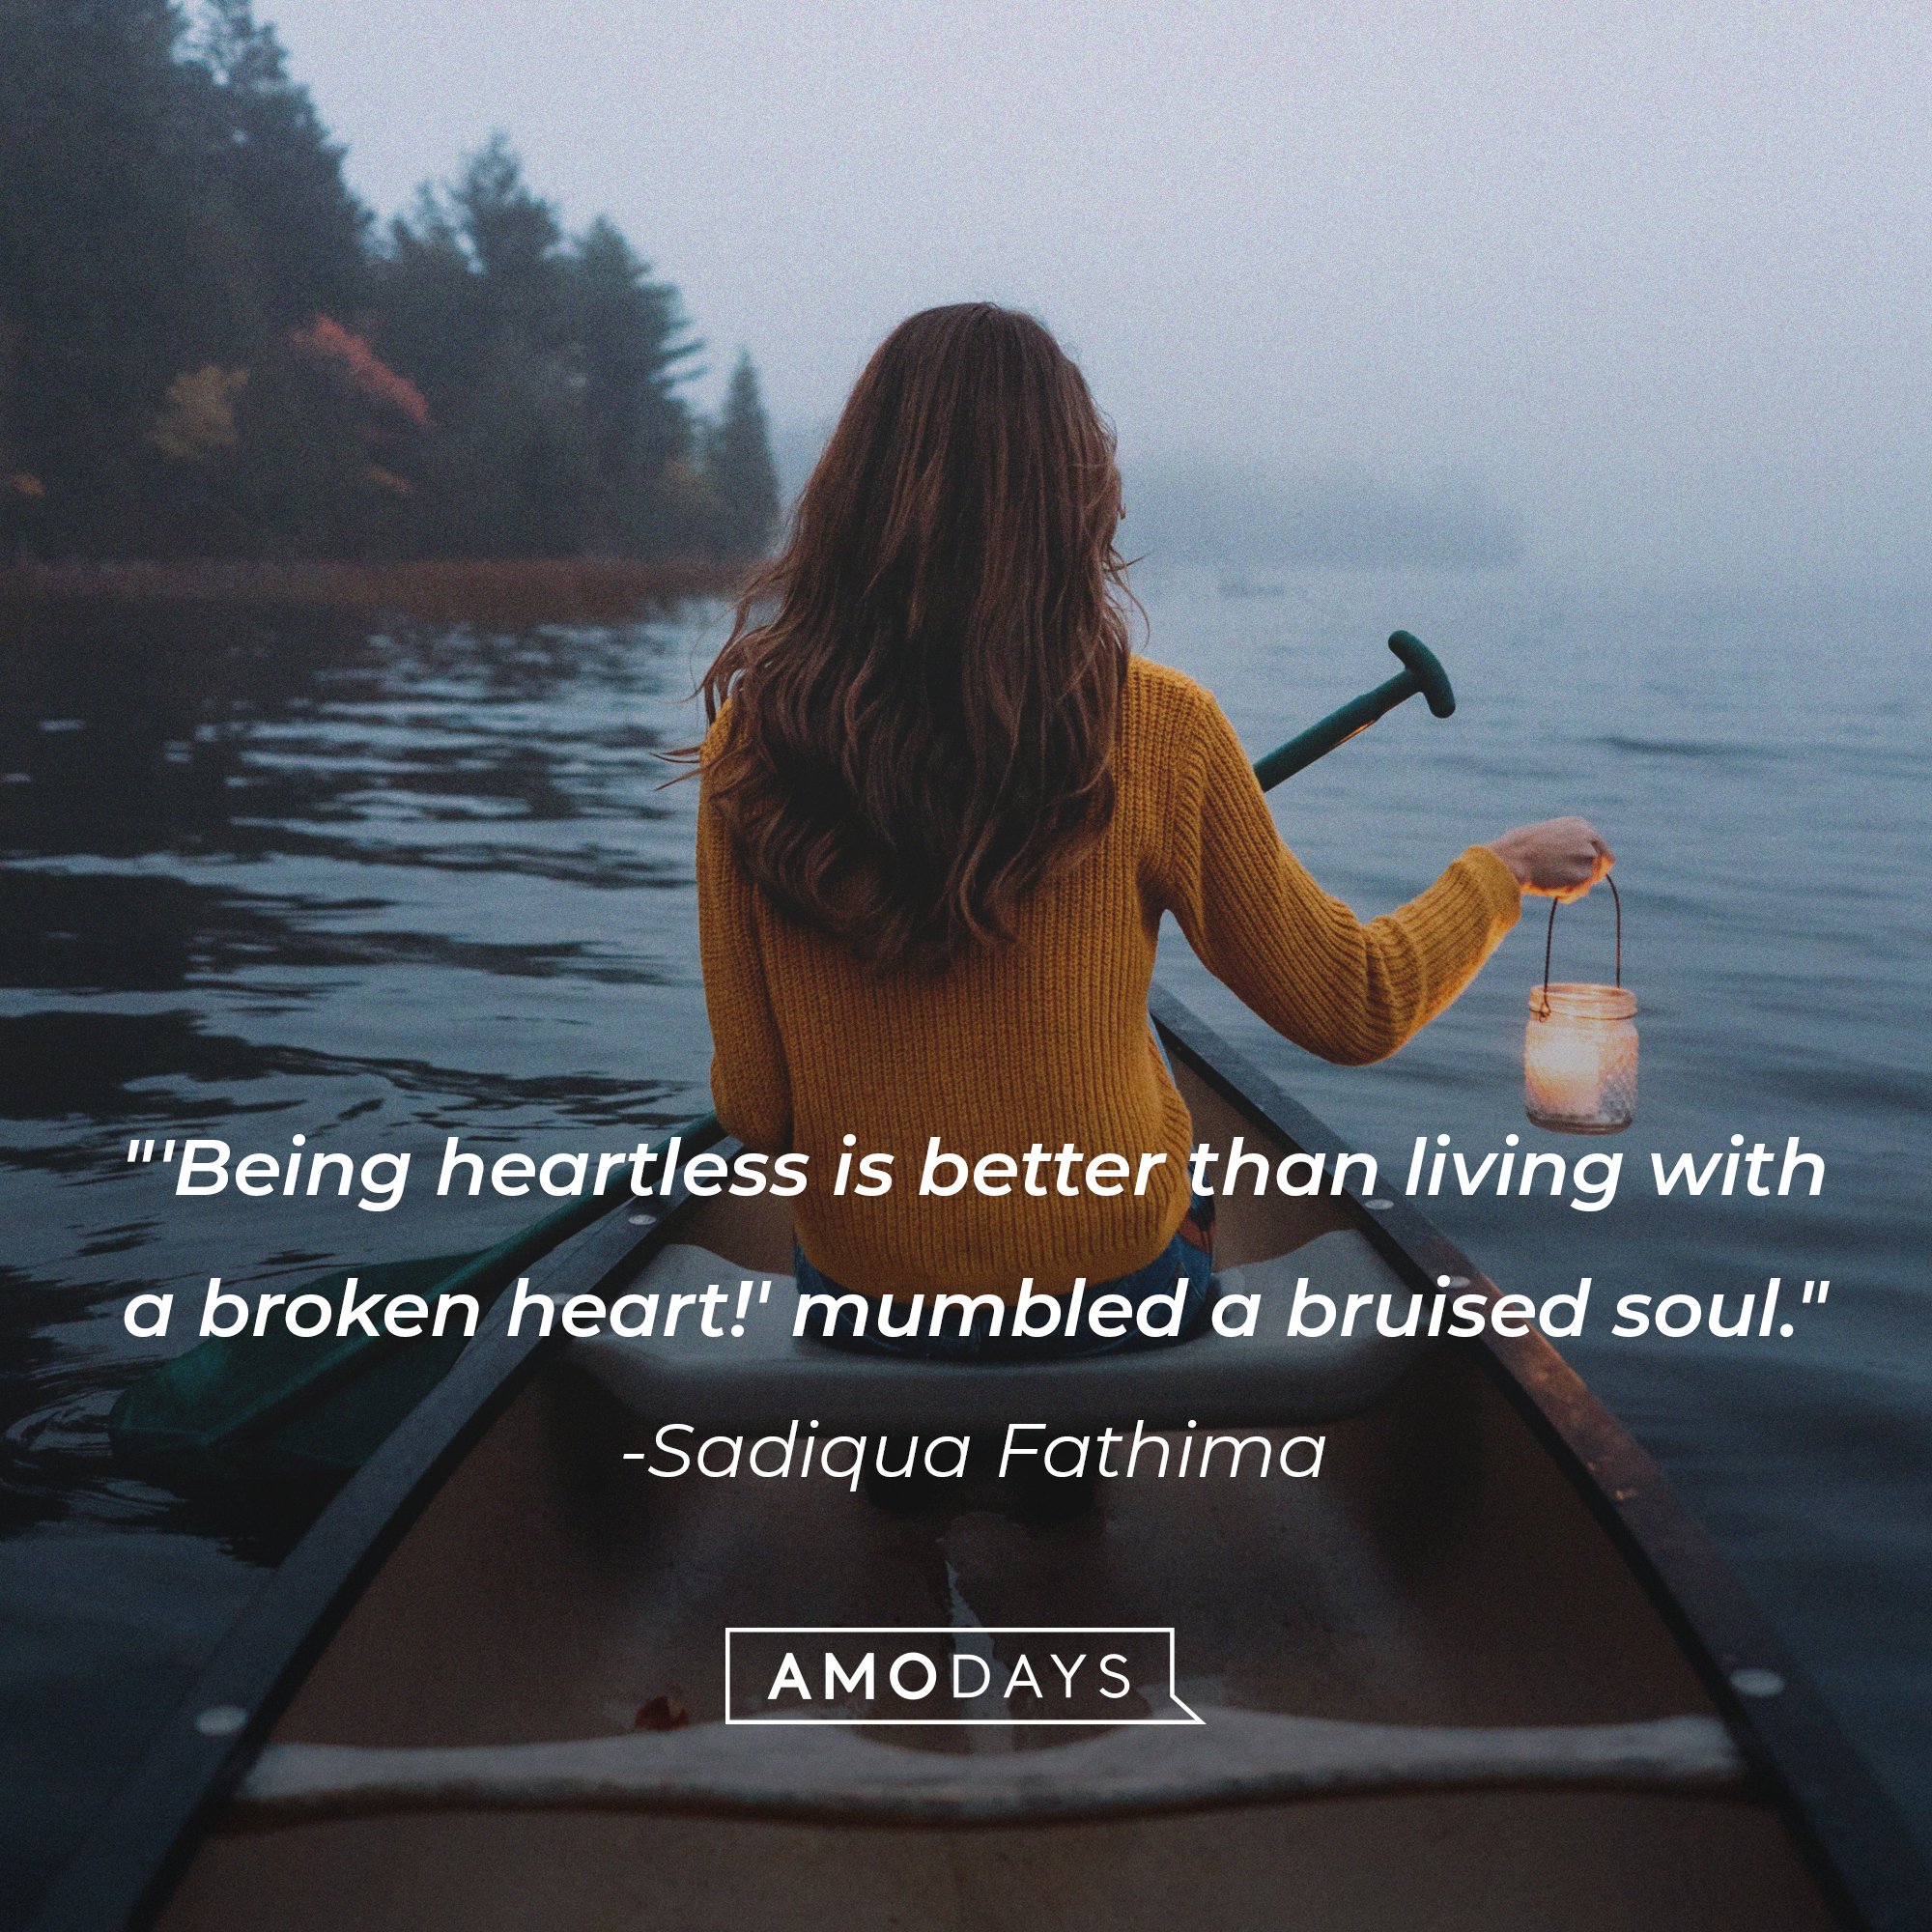 Sadiqua Fathima's quote: "'Being heartless is better than living with a broken heart!' mumbled a bruised soul." | Image: AmoDays